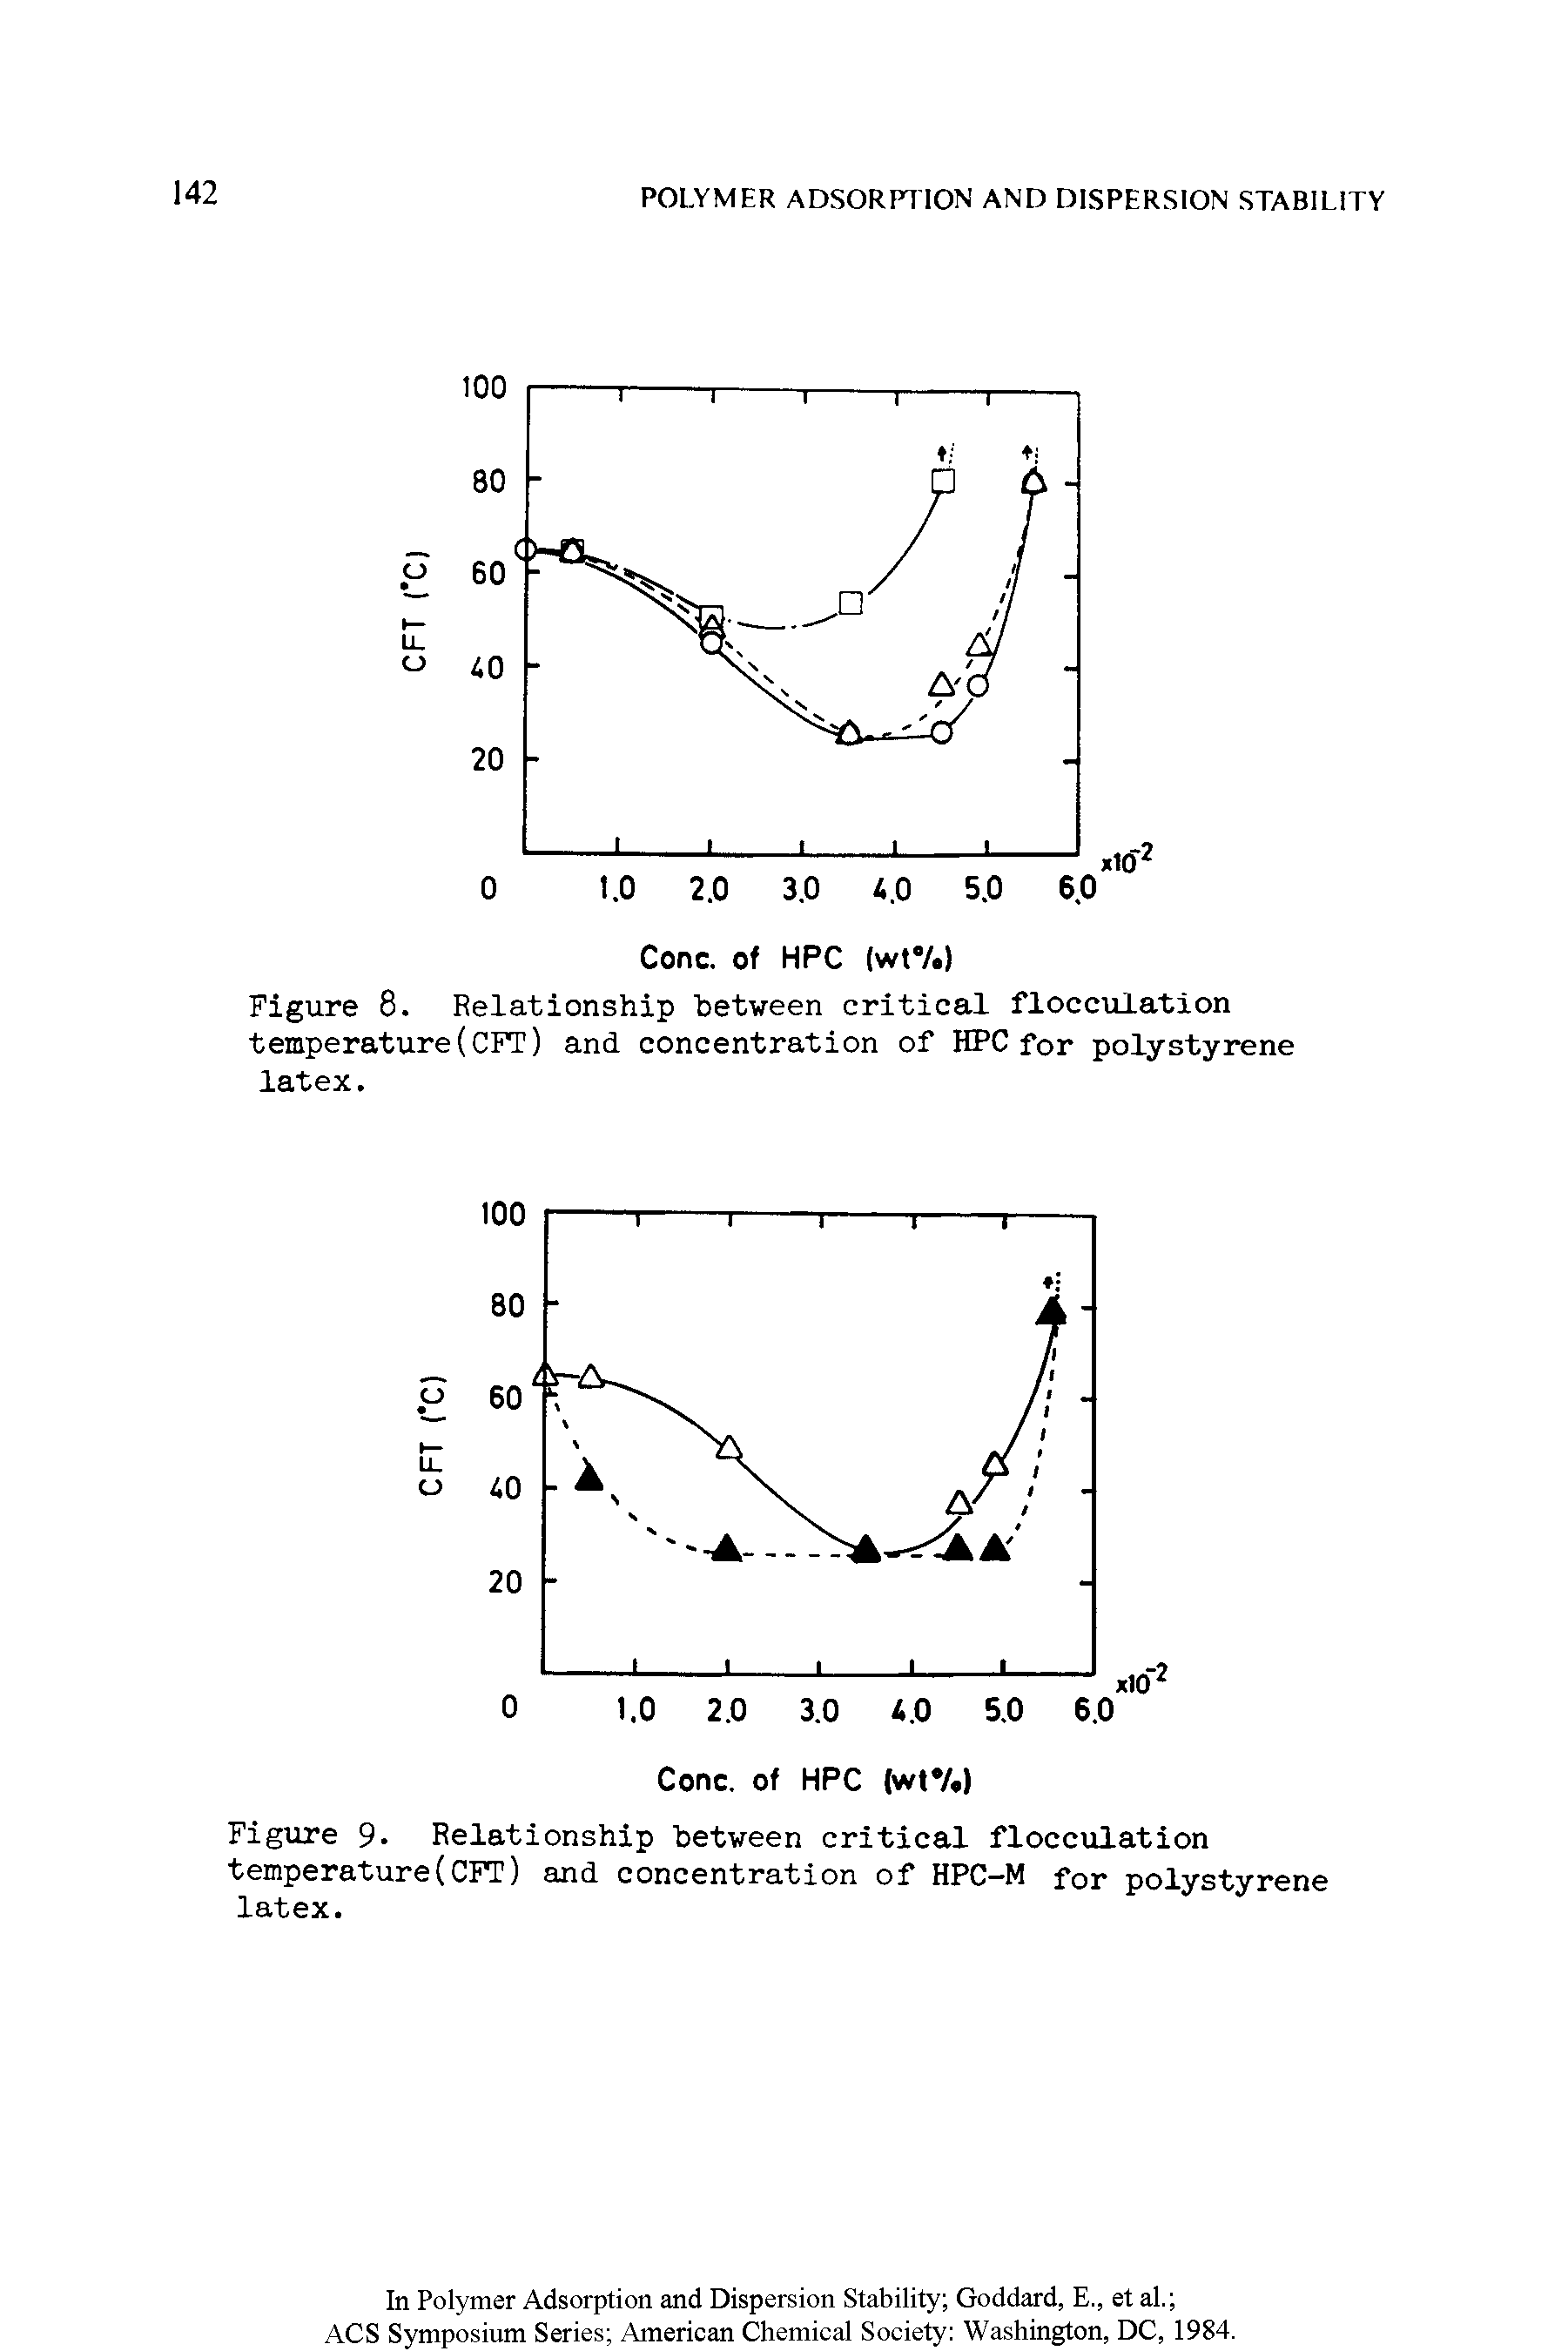 Figure 8. Relationship between critical flocculation temperature(CFT) and concentration of HPC for polystyrene latex.